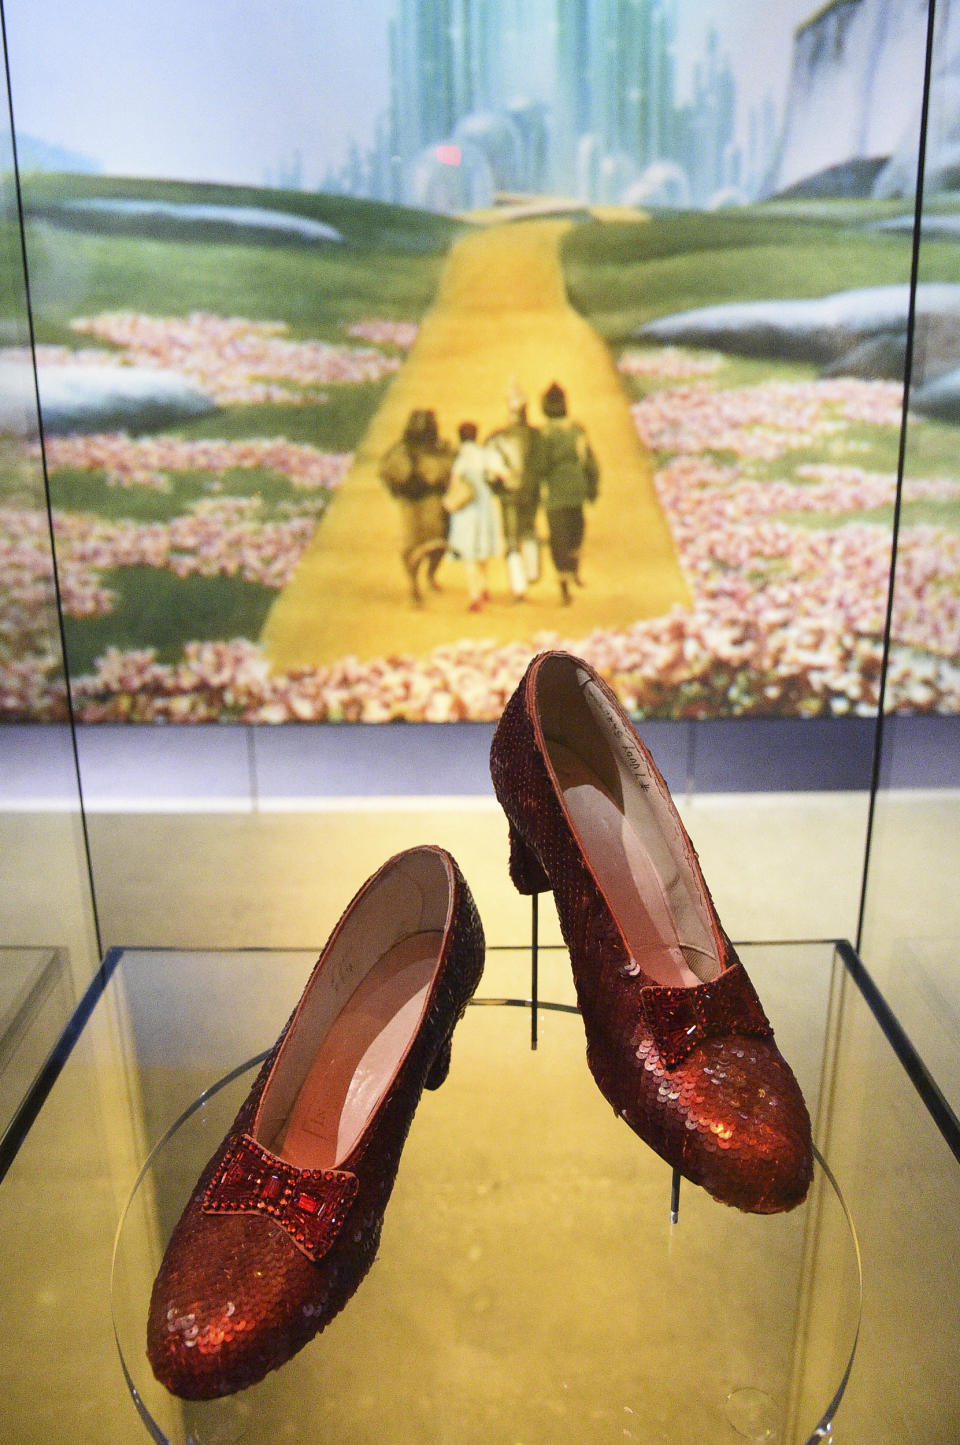 FILE - A pair of ruby slippers worn by Judy Garland in "The Wizard of Oz" are displayed at the Academy Museum on Tuesday, Sept. 21, 2021, in Los Angeles. A dying thief who confessed to stealing the slippers because he wanted to pull off “one last score,” was given no prison time at his sentencing hearing Monday, Jan 29, 2024. The thief, Terry Jon Martin, said he had planned to remove what he thought were real rubies from the shoes and sell them. Once he learned the shoes were adorned only with sequins and glass beads, he got rid of them. (Photo by Richard Shotwell/Invision/AP, File)